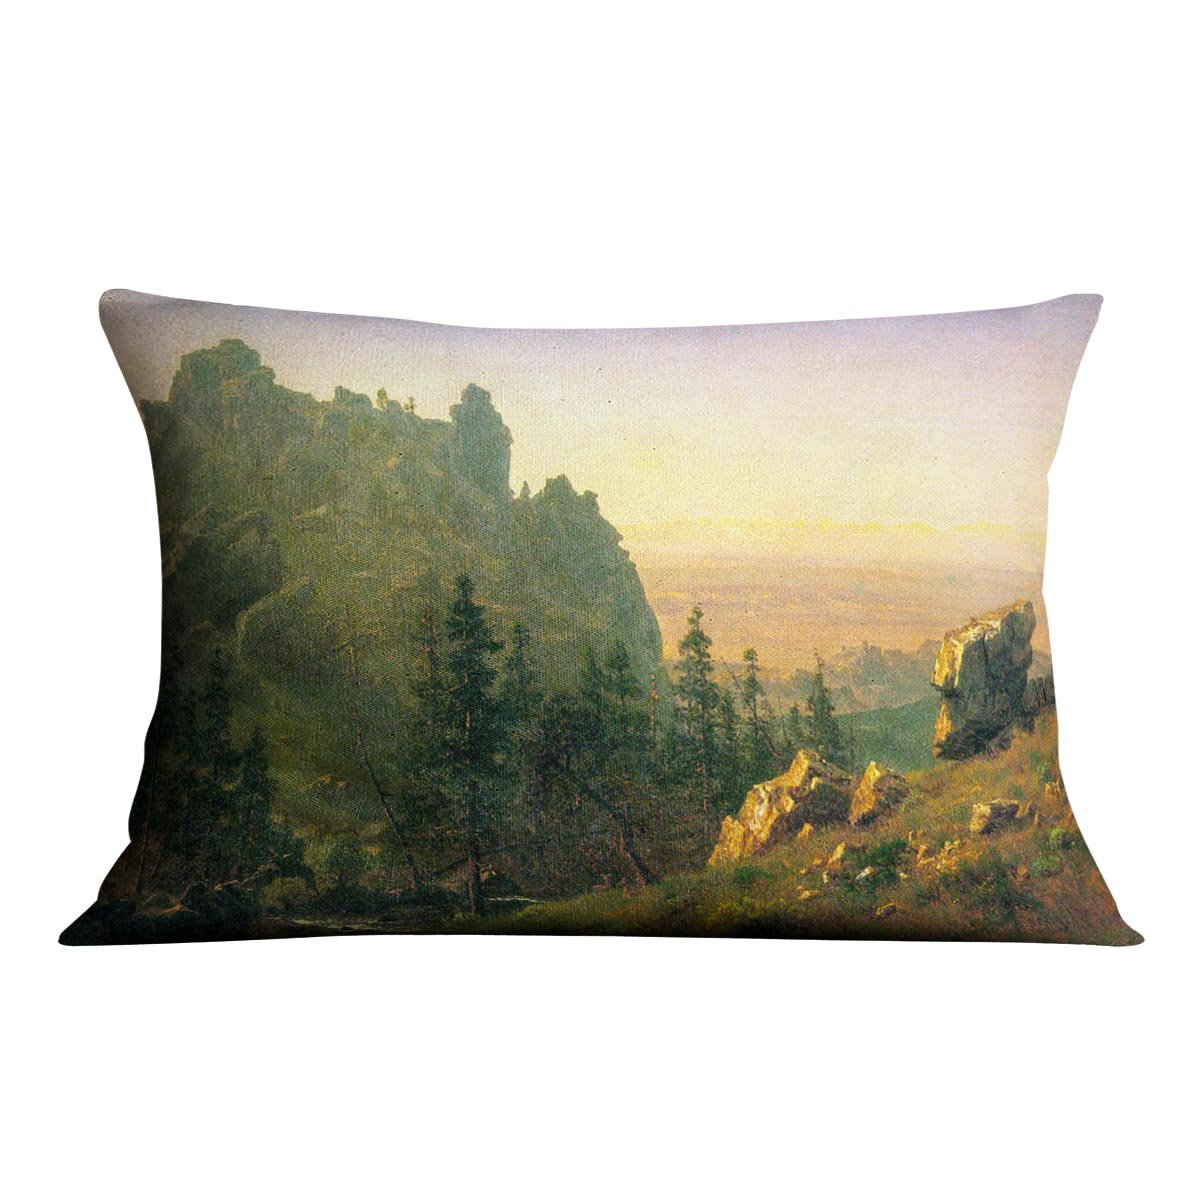 Wind River Country by Bierstadt Cushion - Canvas Art Rocks - 4